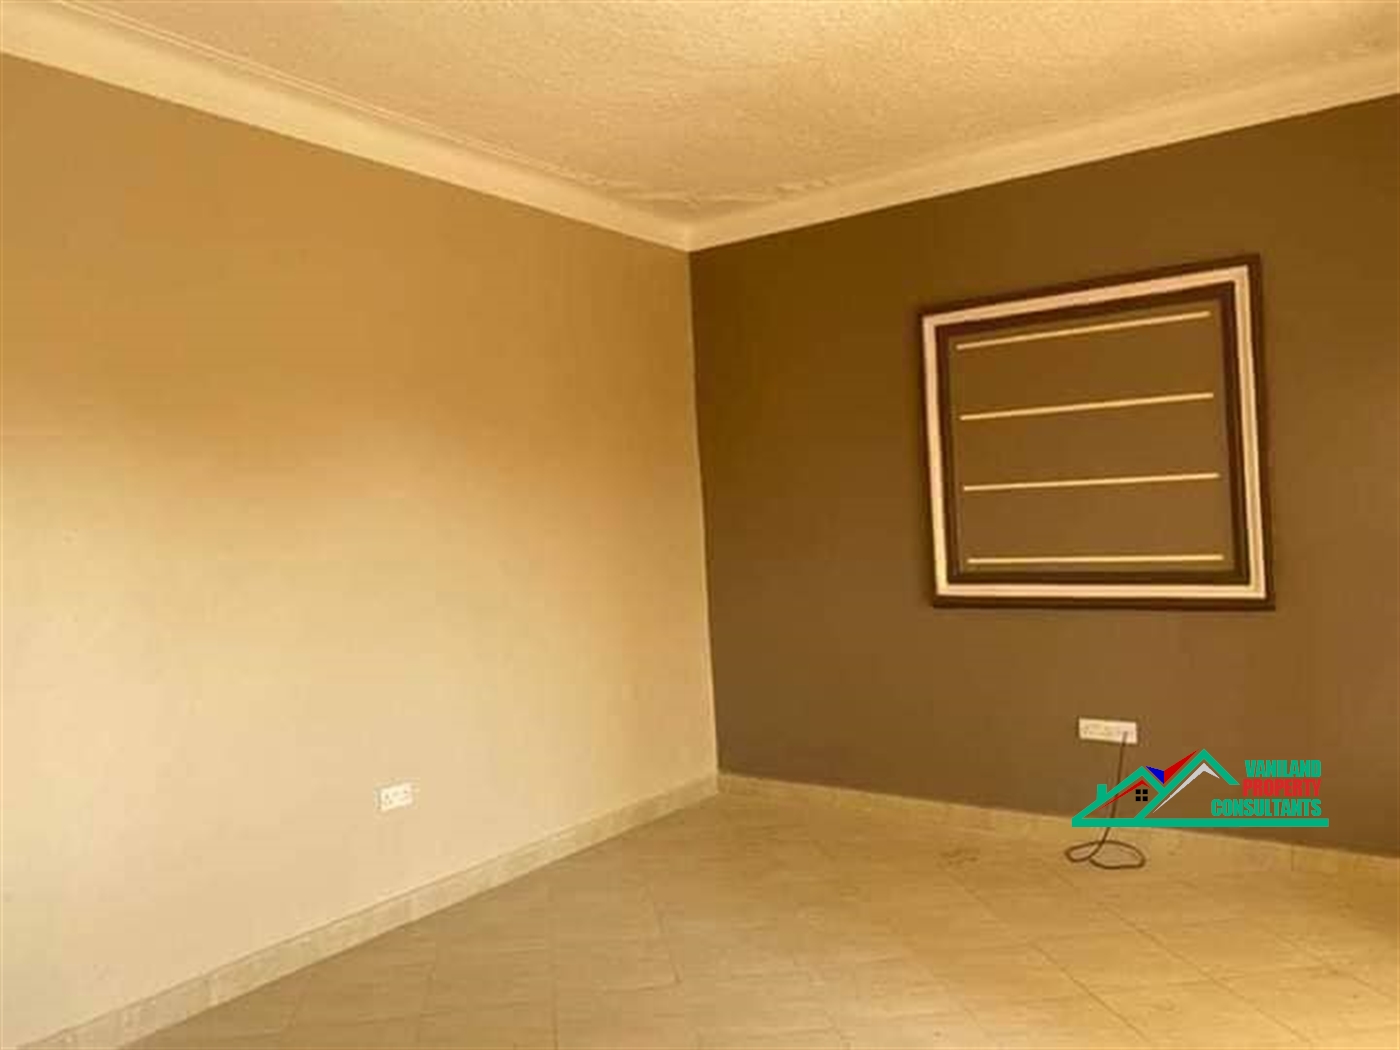 Apartment for rent in Kyanja Wakiso